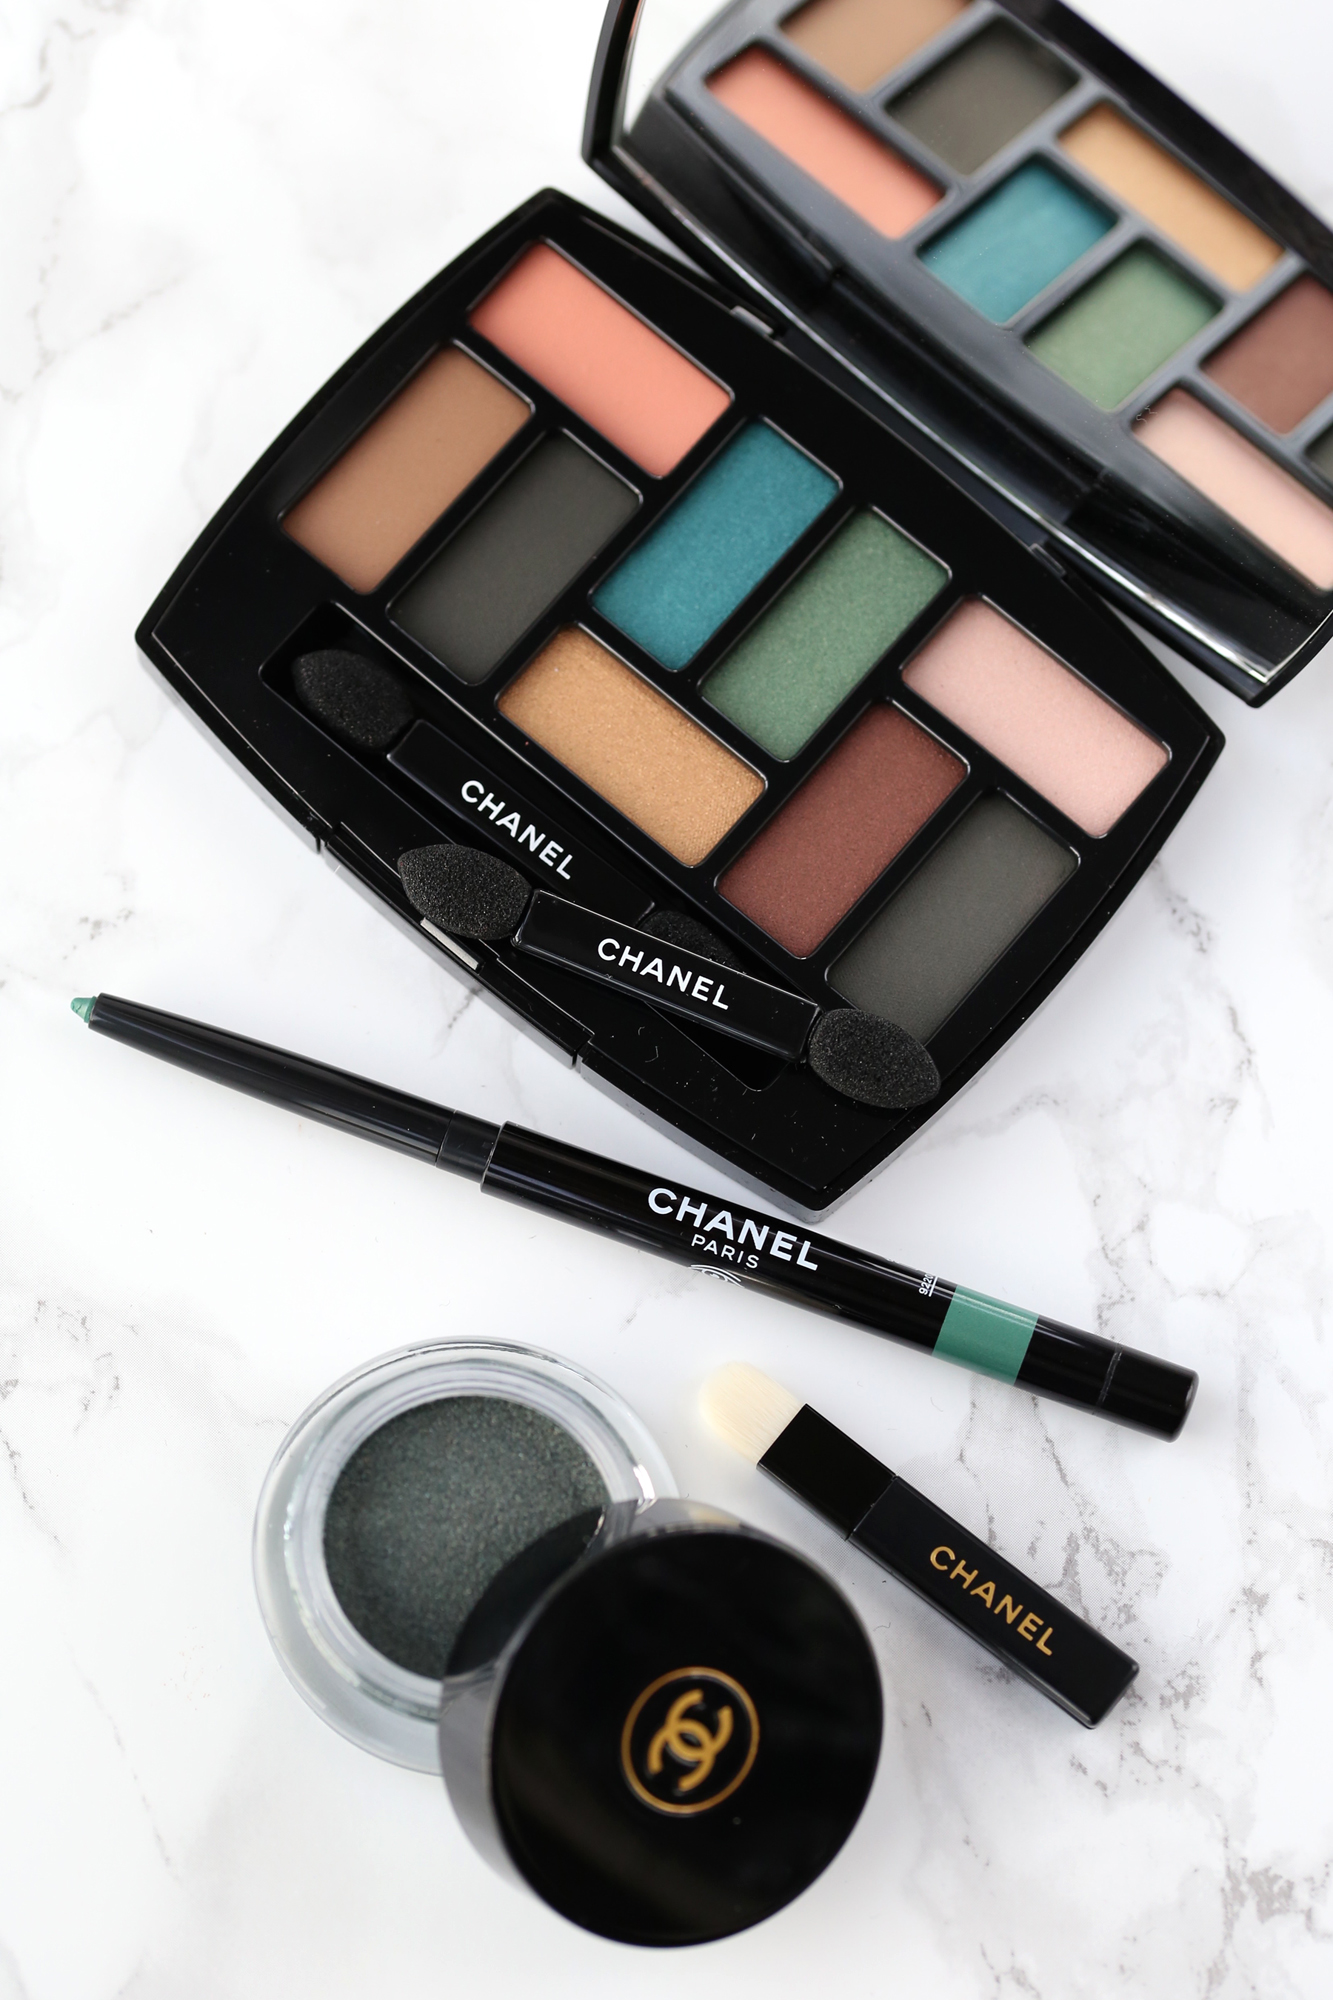 A Look at a Few Pieces From the Chanel Ombre Premiere Eyes Collection -  Makeup and Beauty Blog